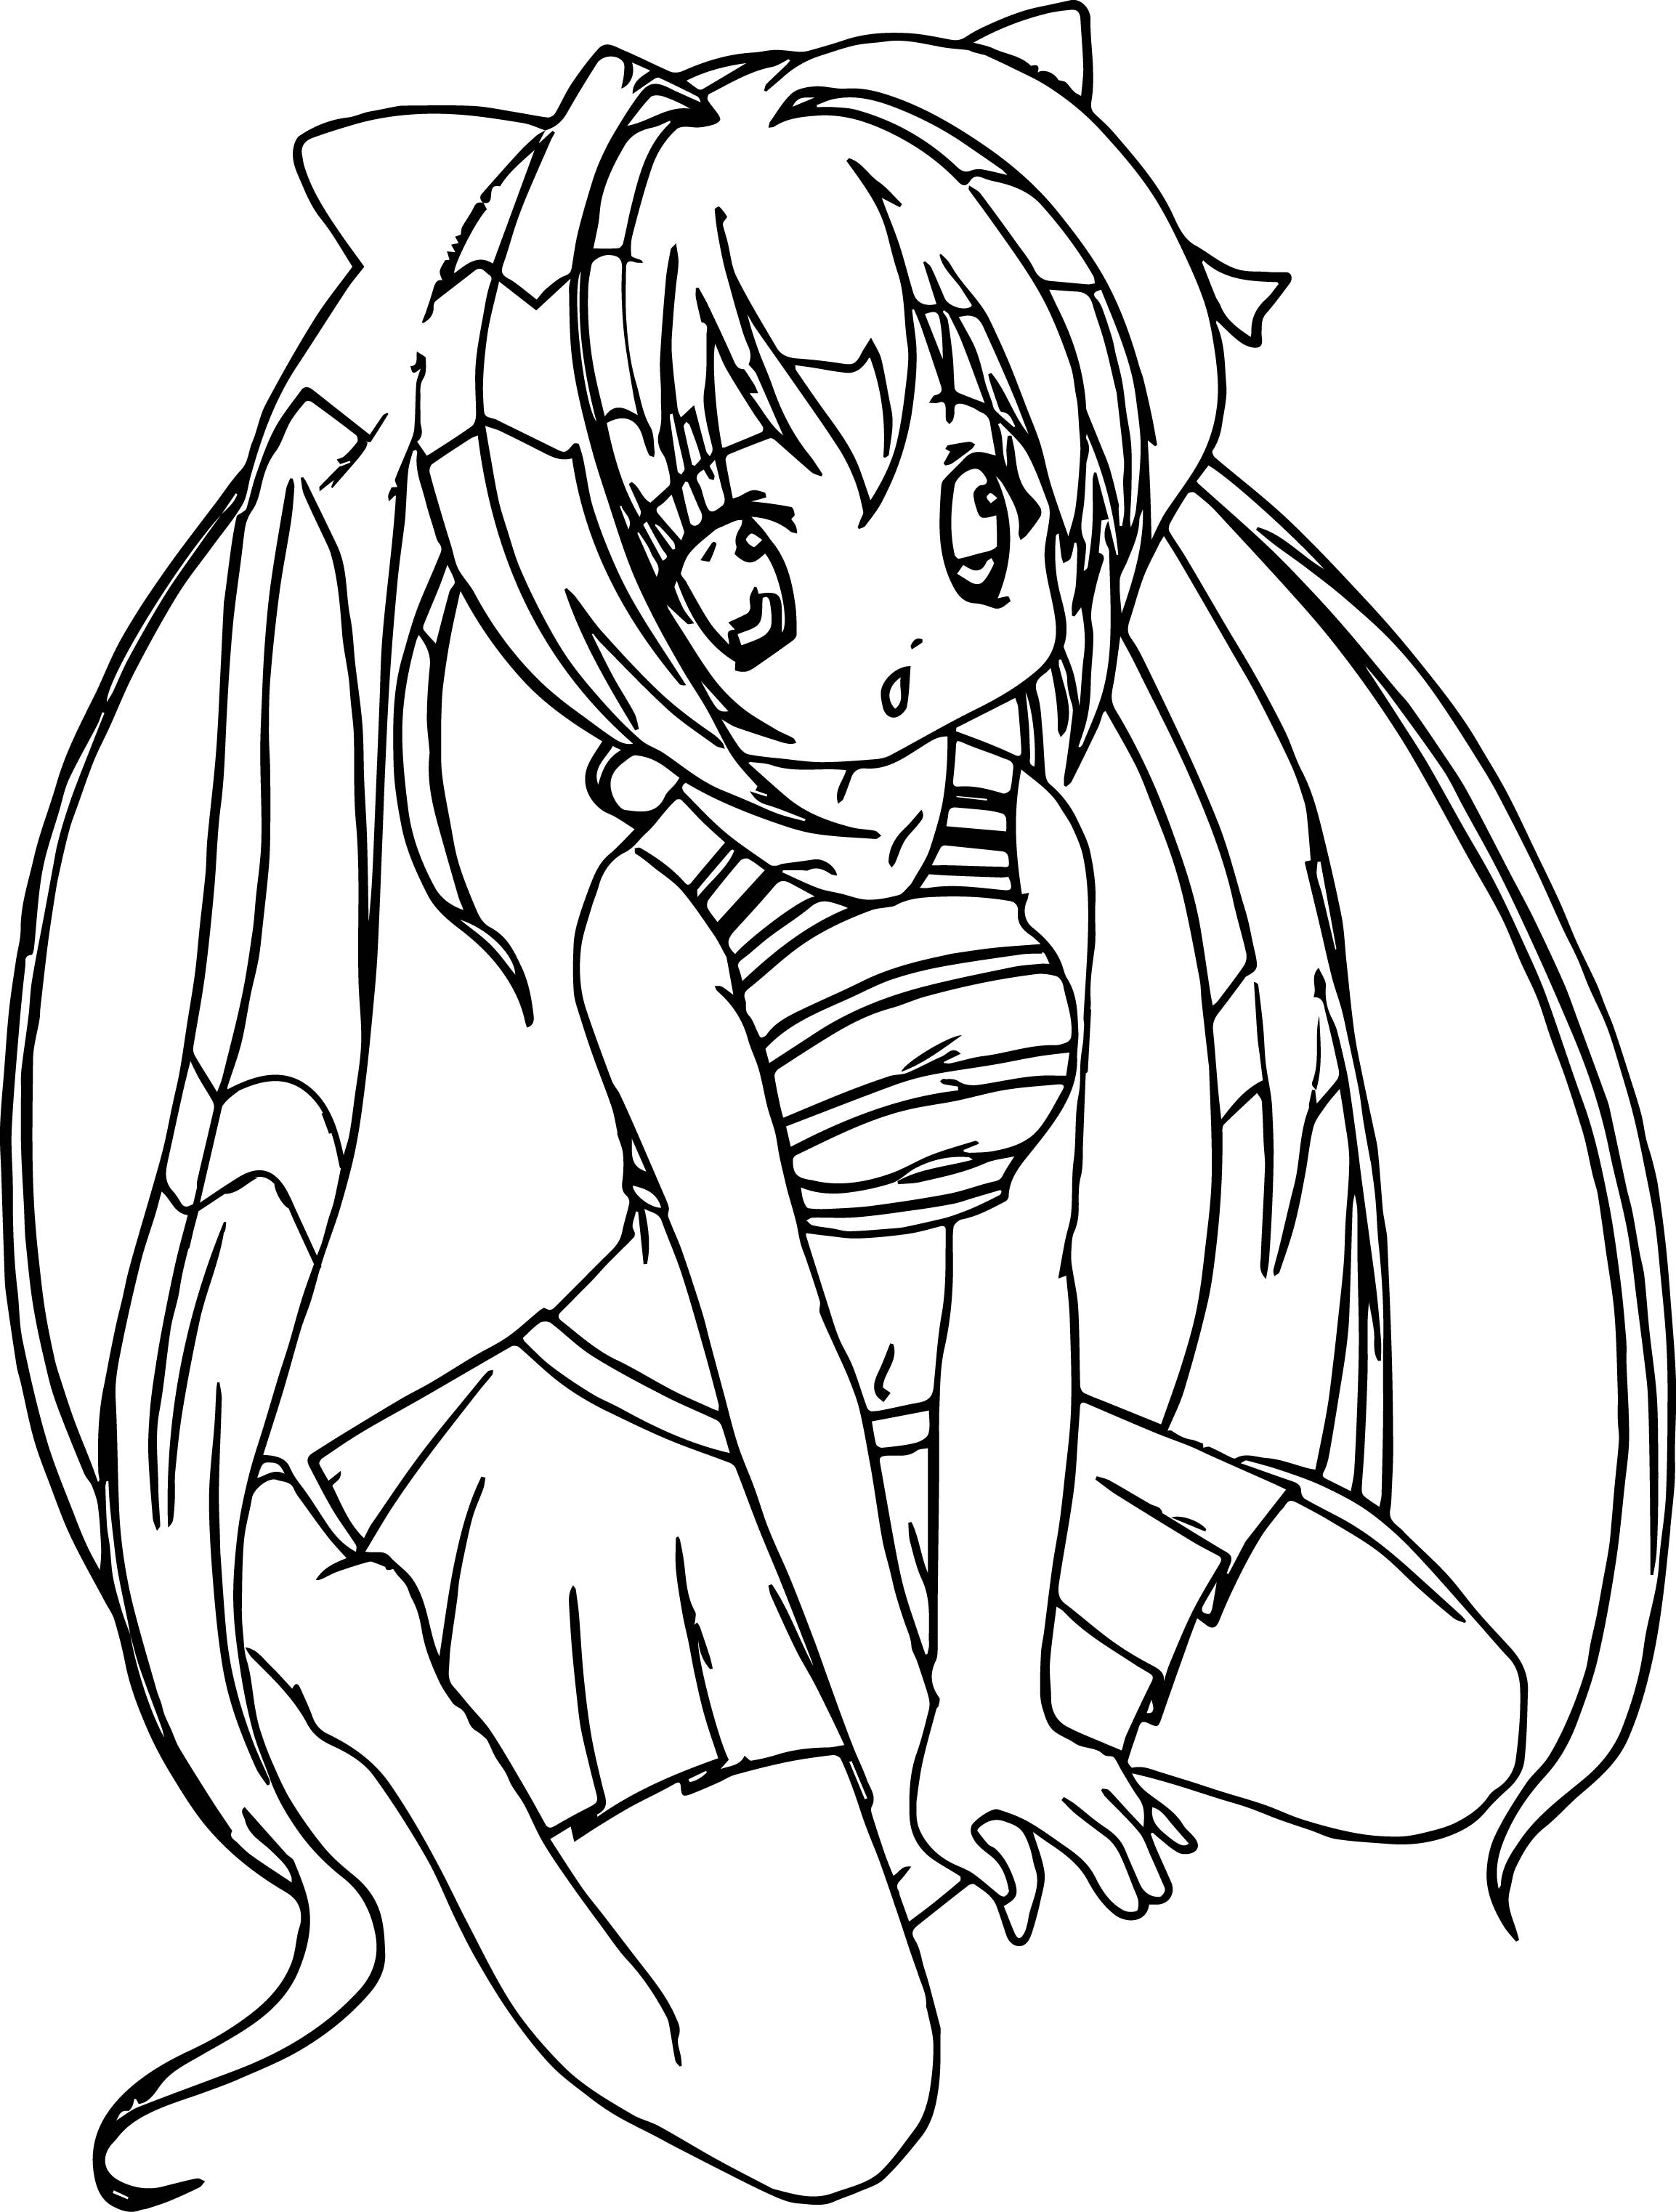 Anime Coloring Pages Girl
 Anime Girl Student Coloring Page